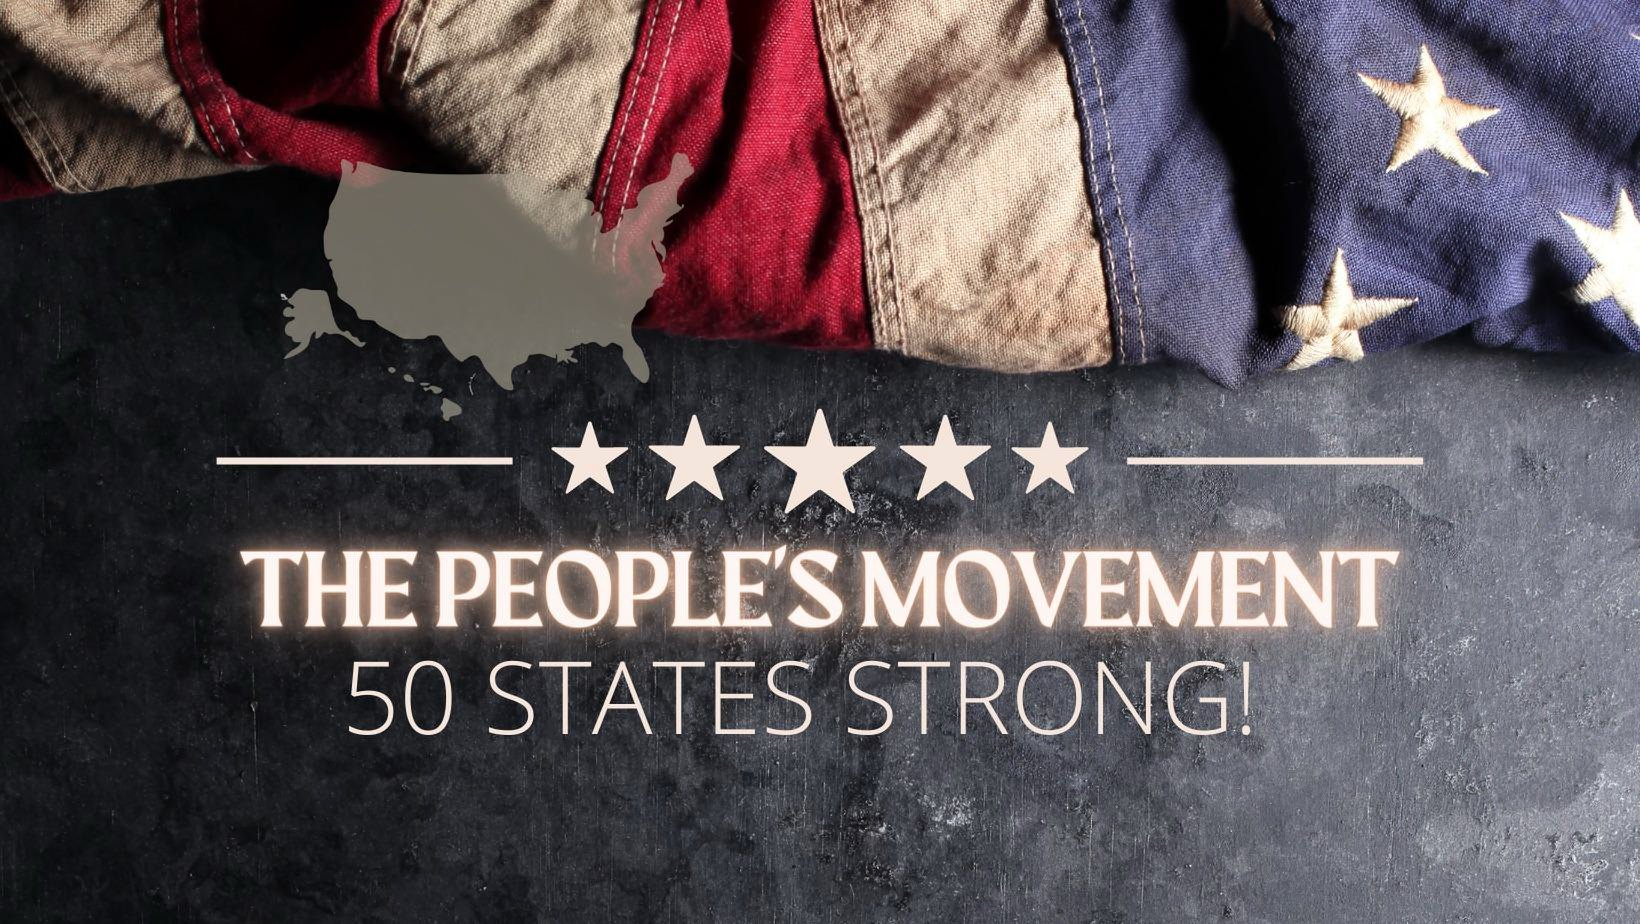  THE PEOPLE'S MOVEMENT 50 STATE STRONG